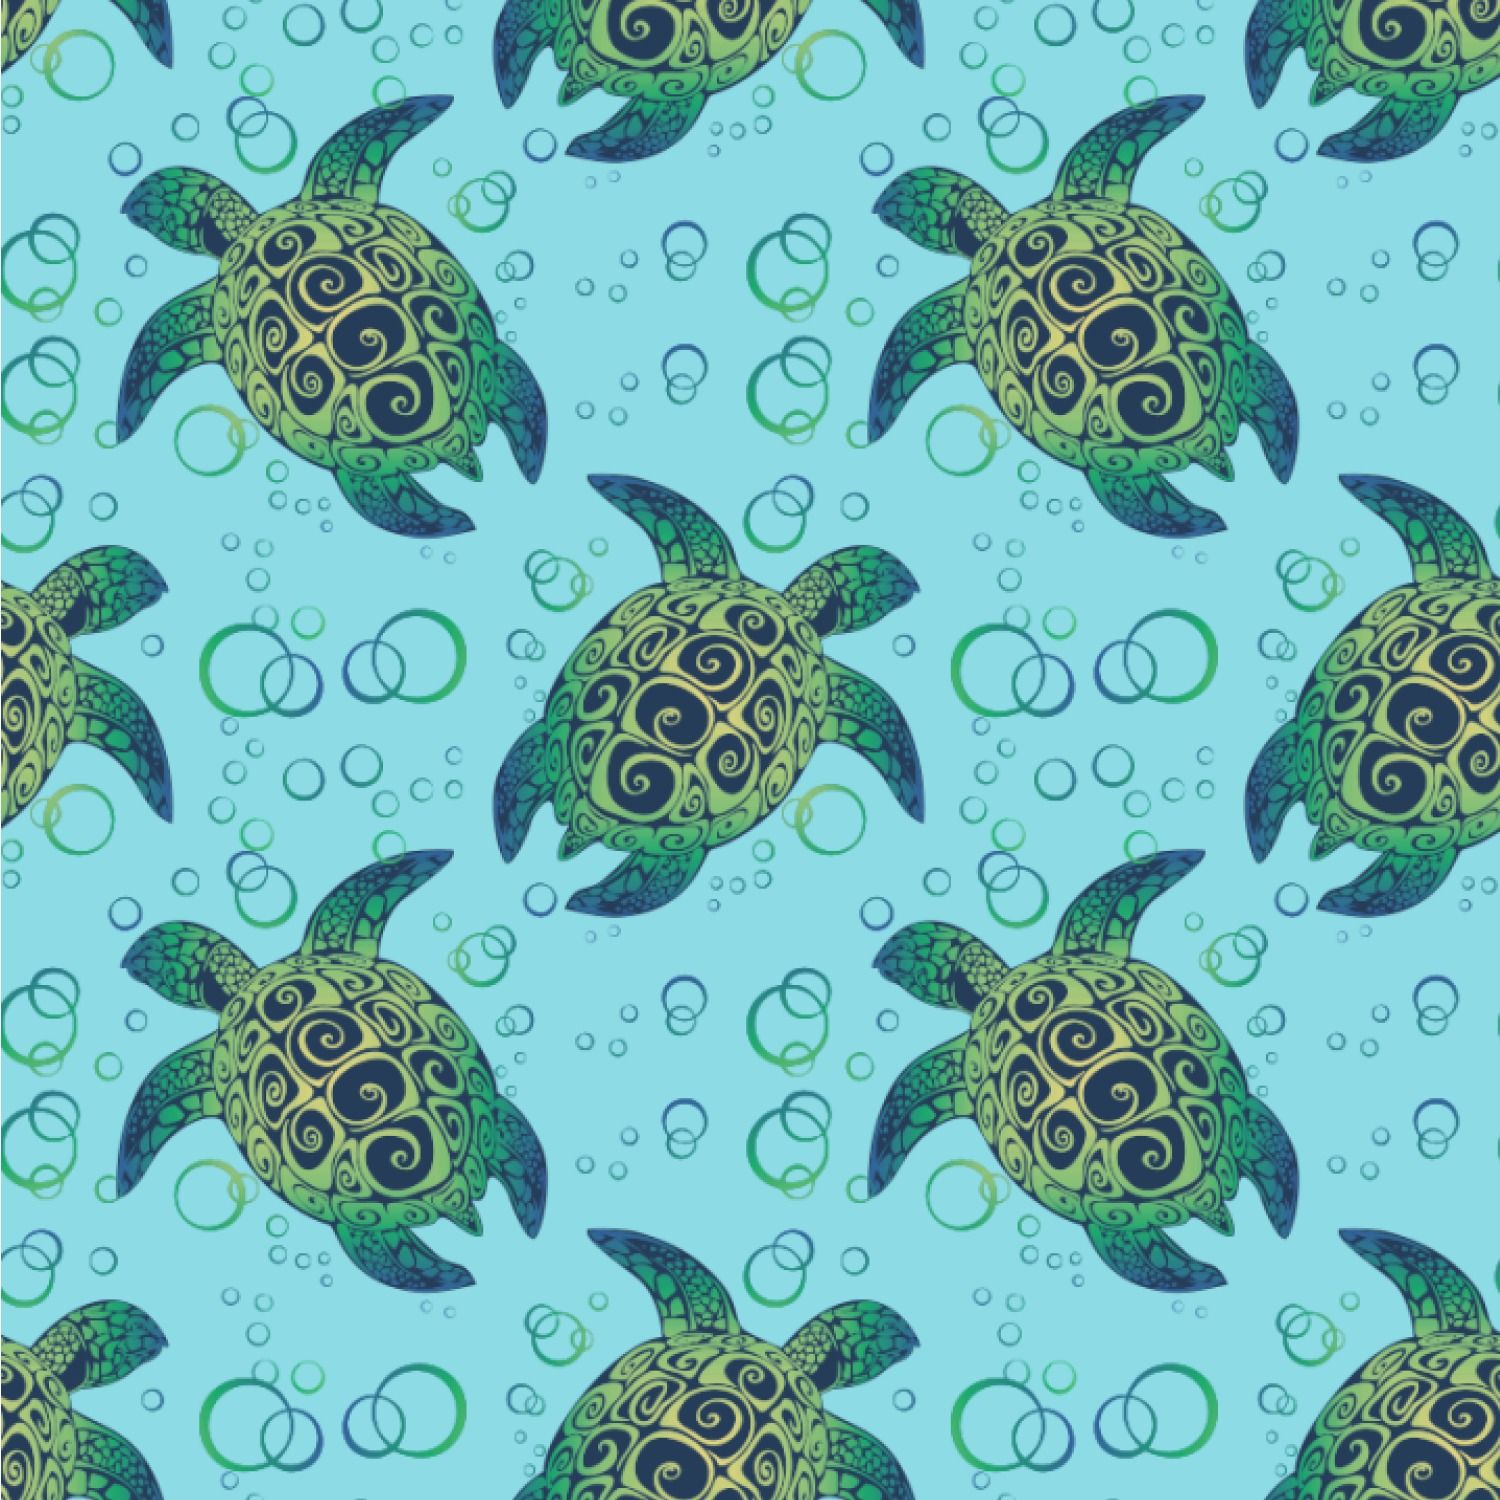 A blue and green turtle pattern - Sea turtle, turtle